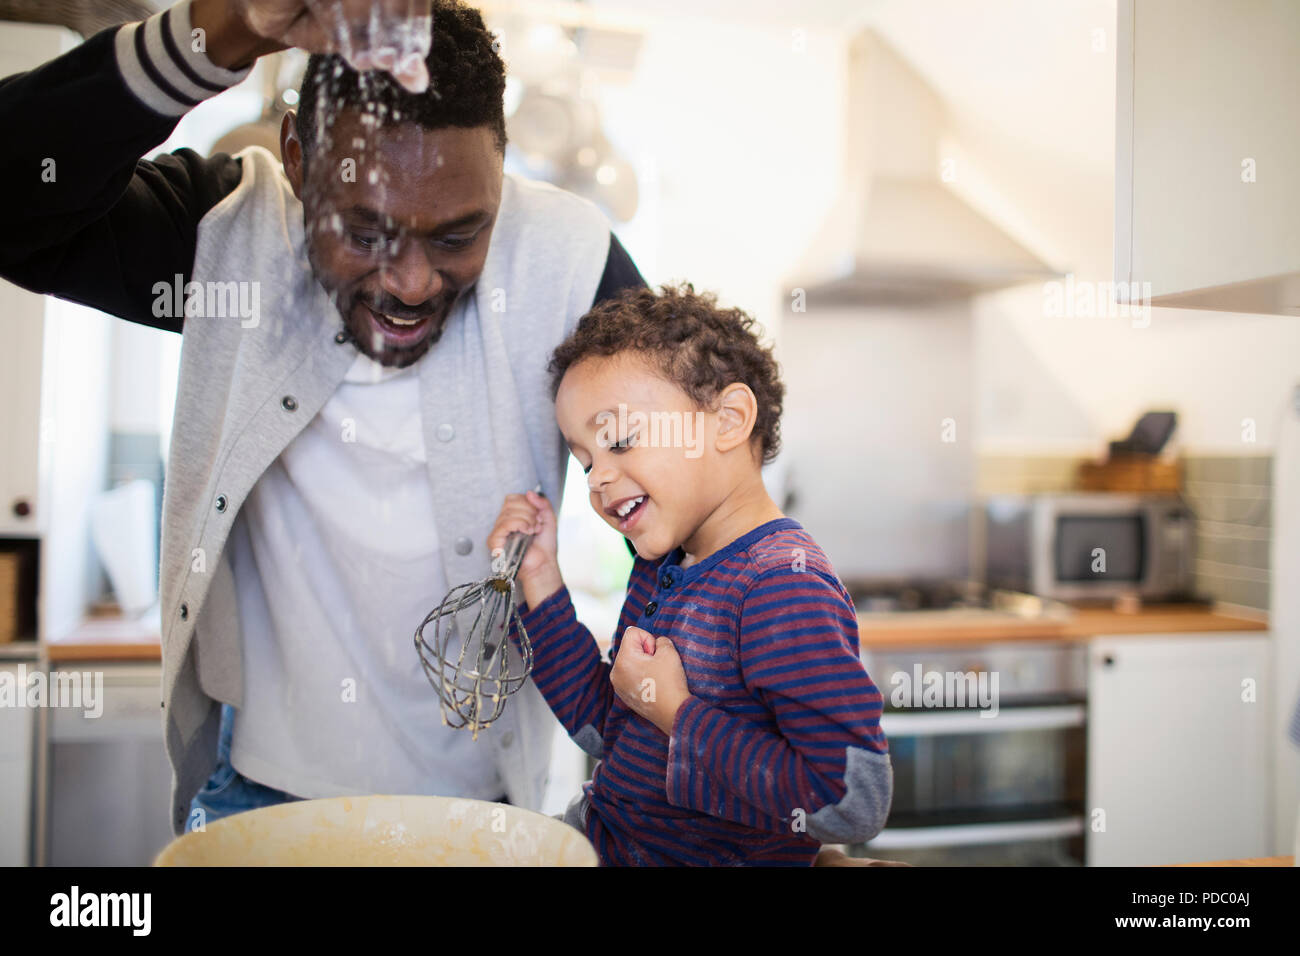 Playful father and son baking in kitchen Stock Photo